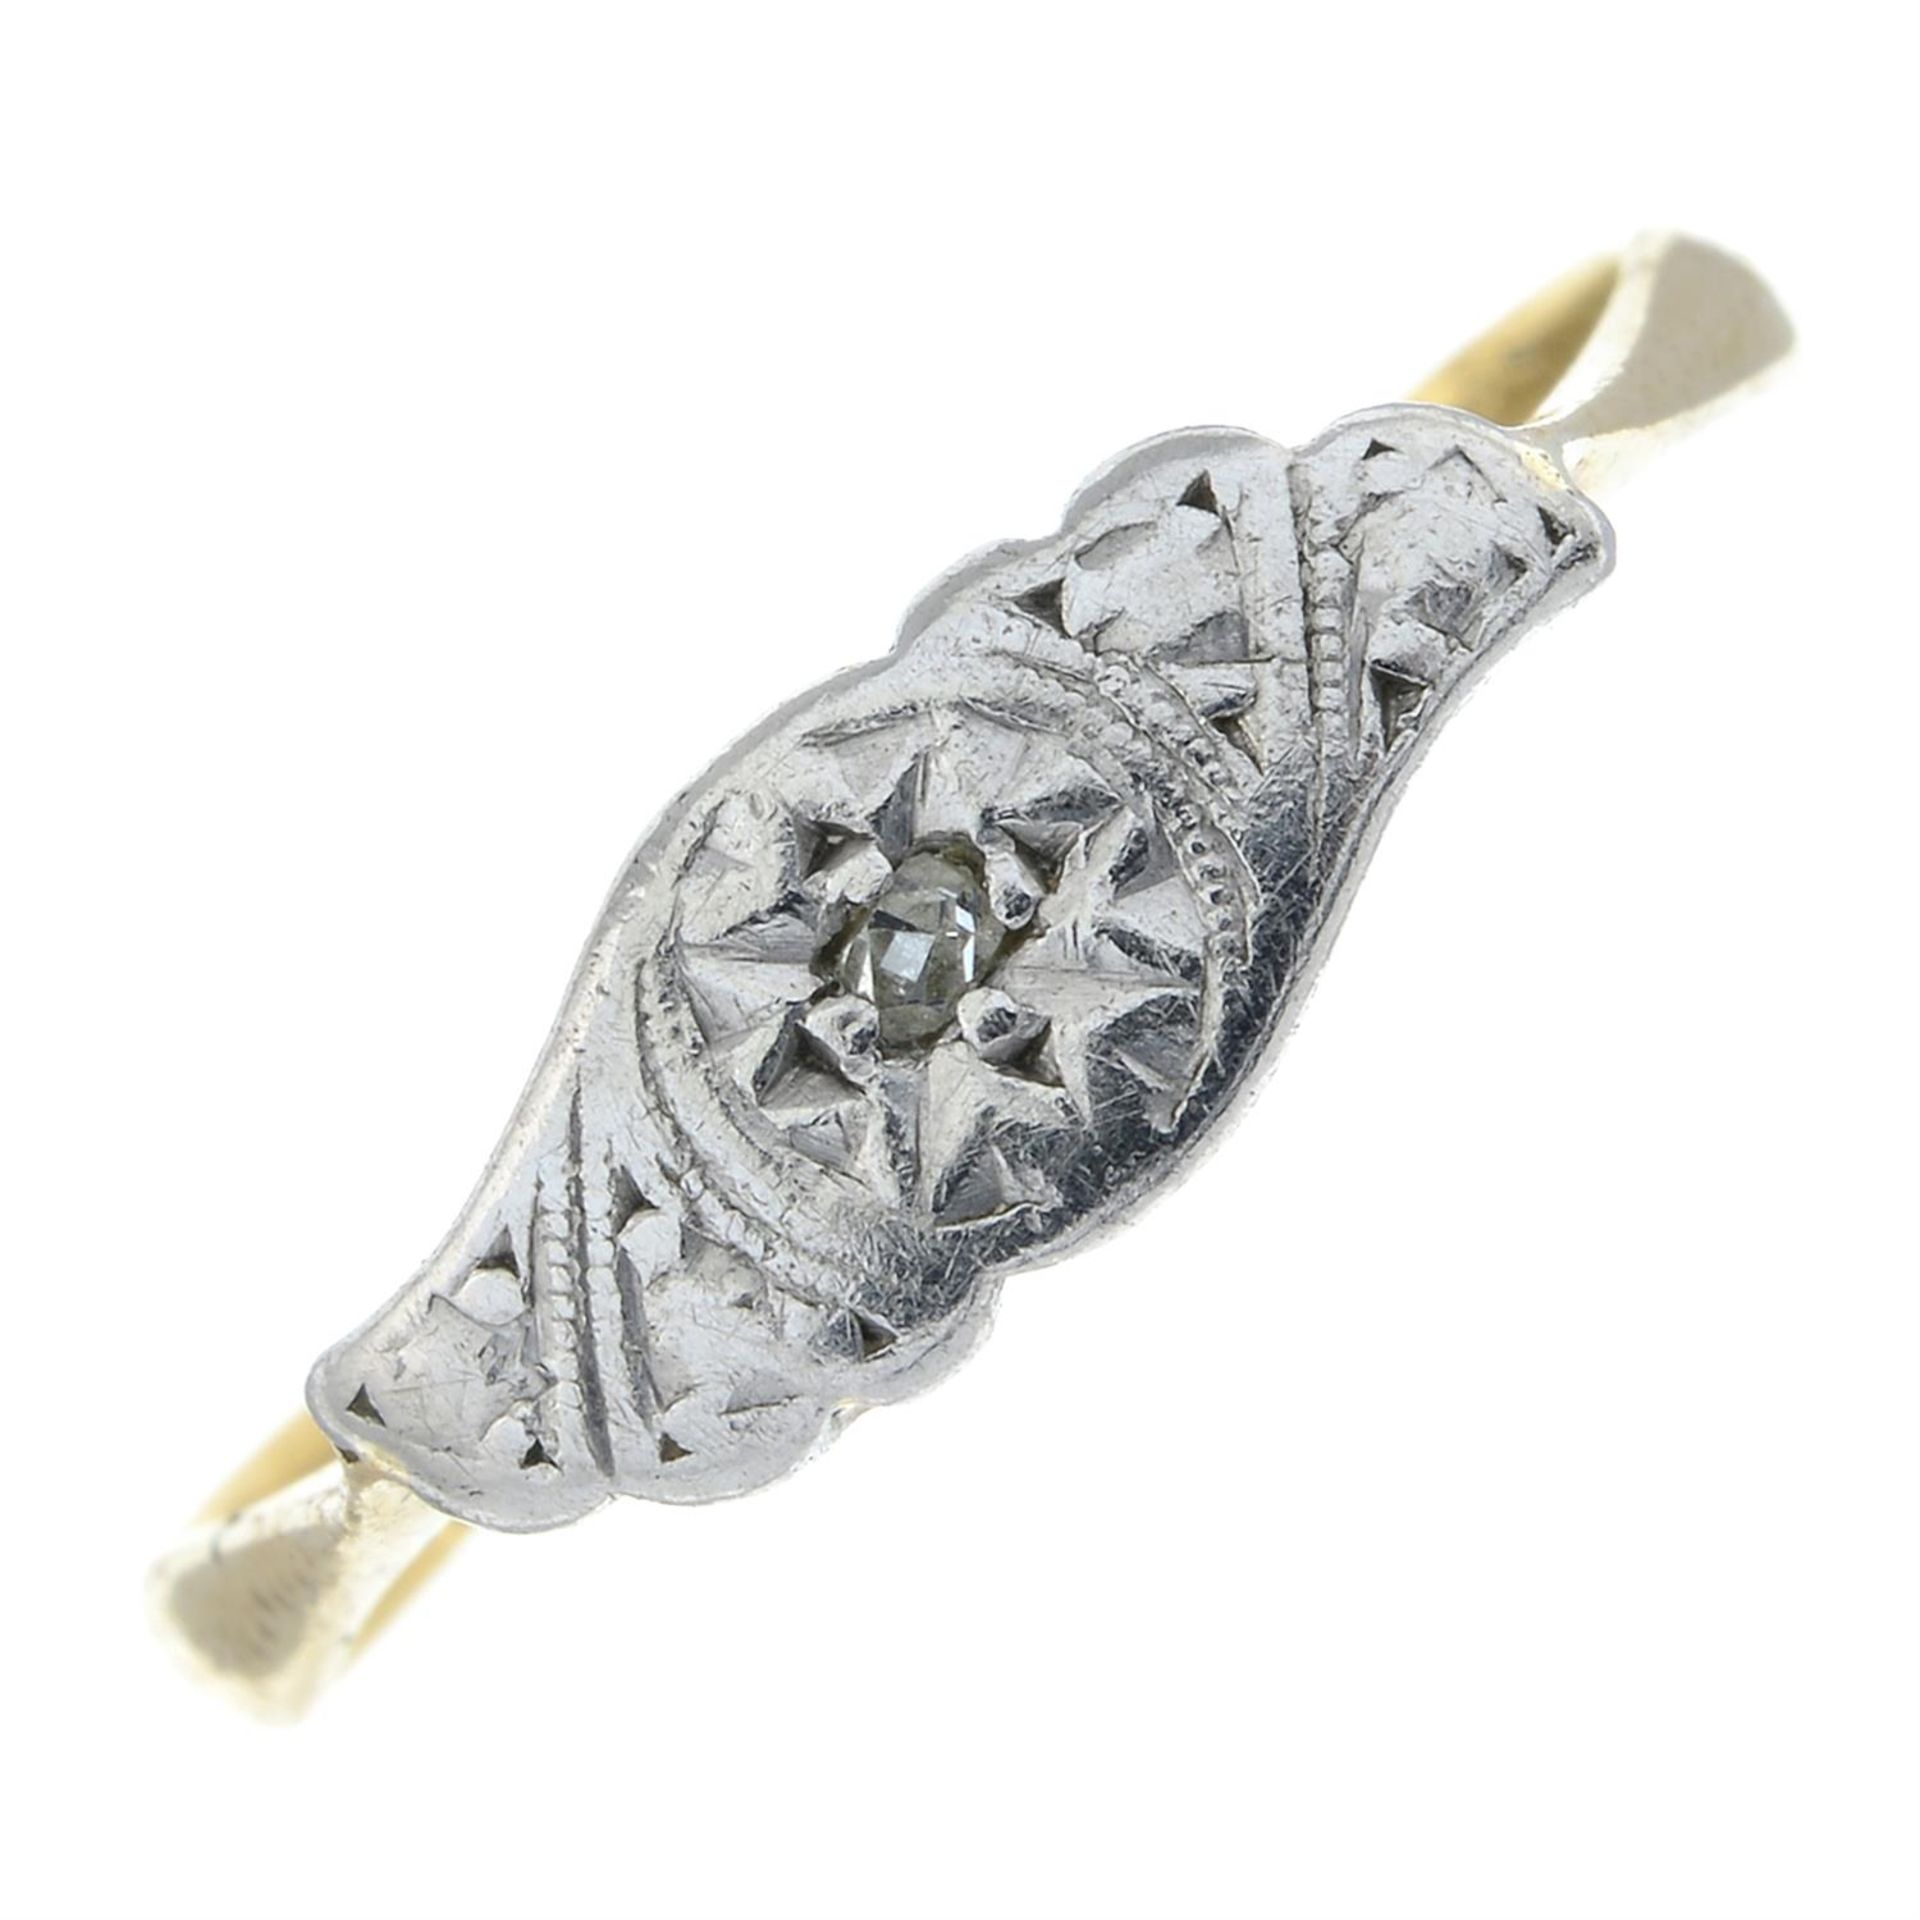 An early to mid 20th century 18ct gold and platinum single-cut diamond single-stone ring.